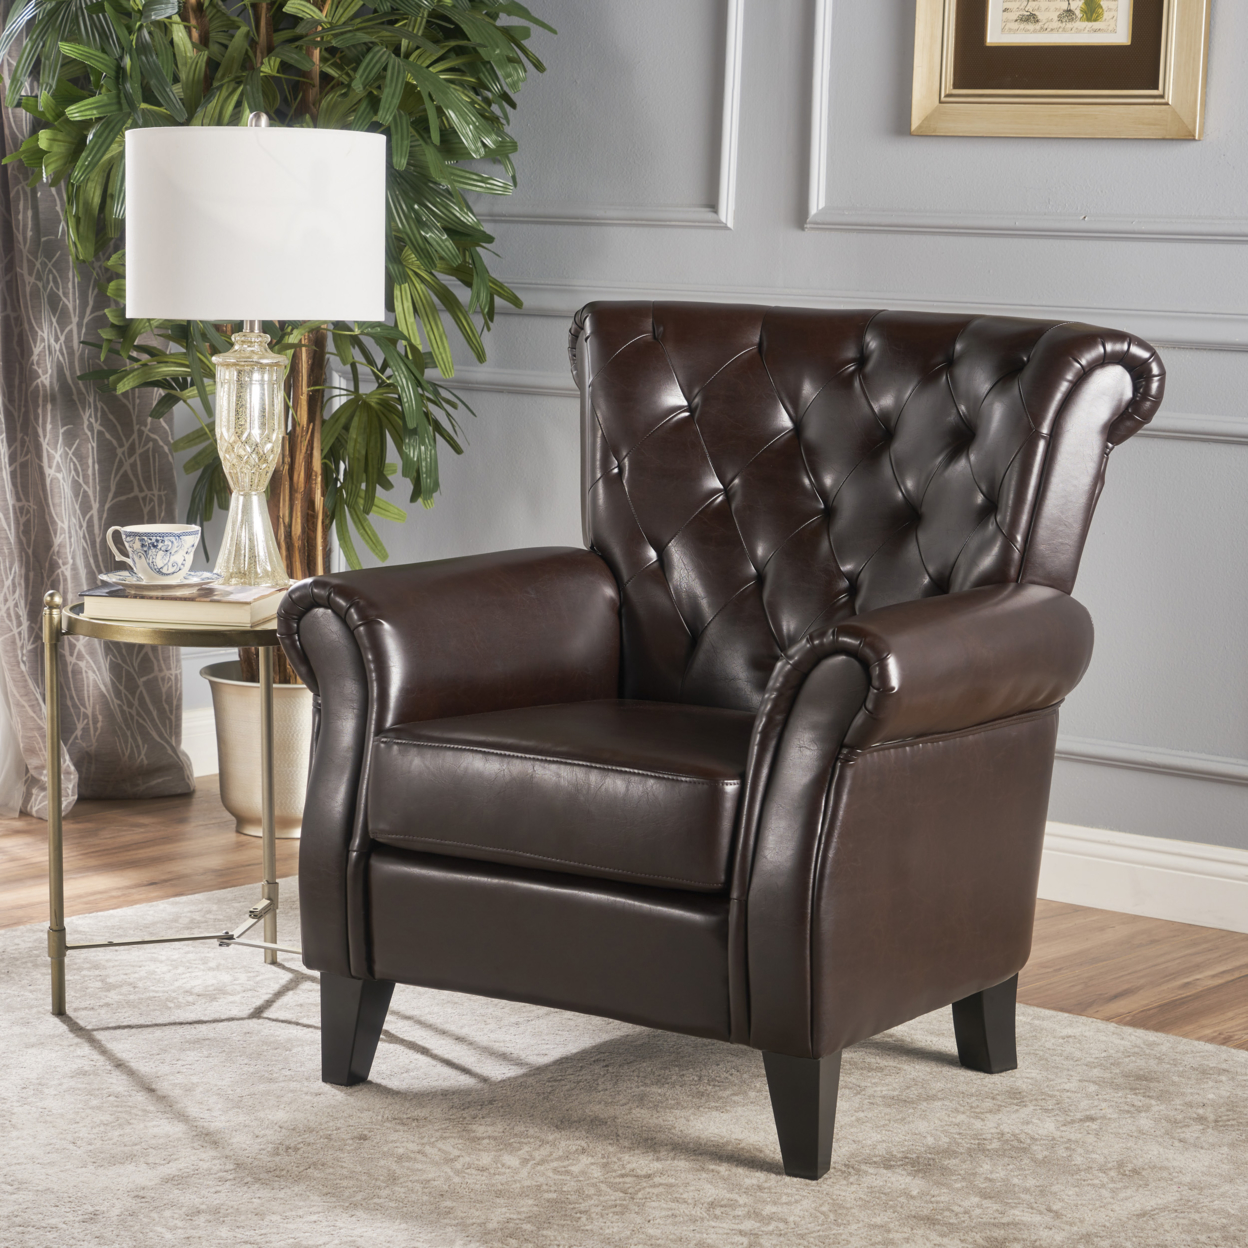 Lucille Oversized Tufted Hazelnut Brown Leather Club Chair